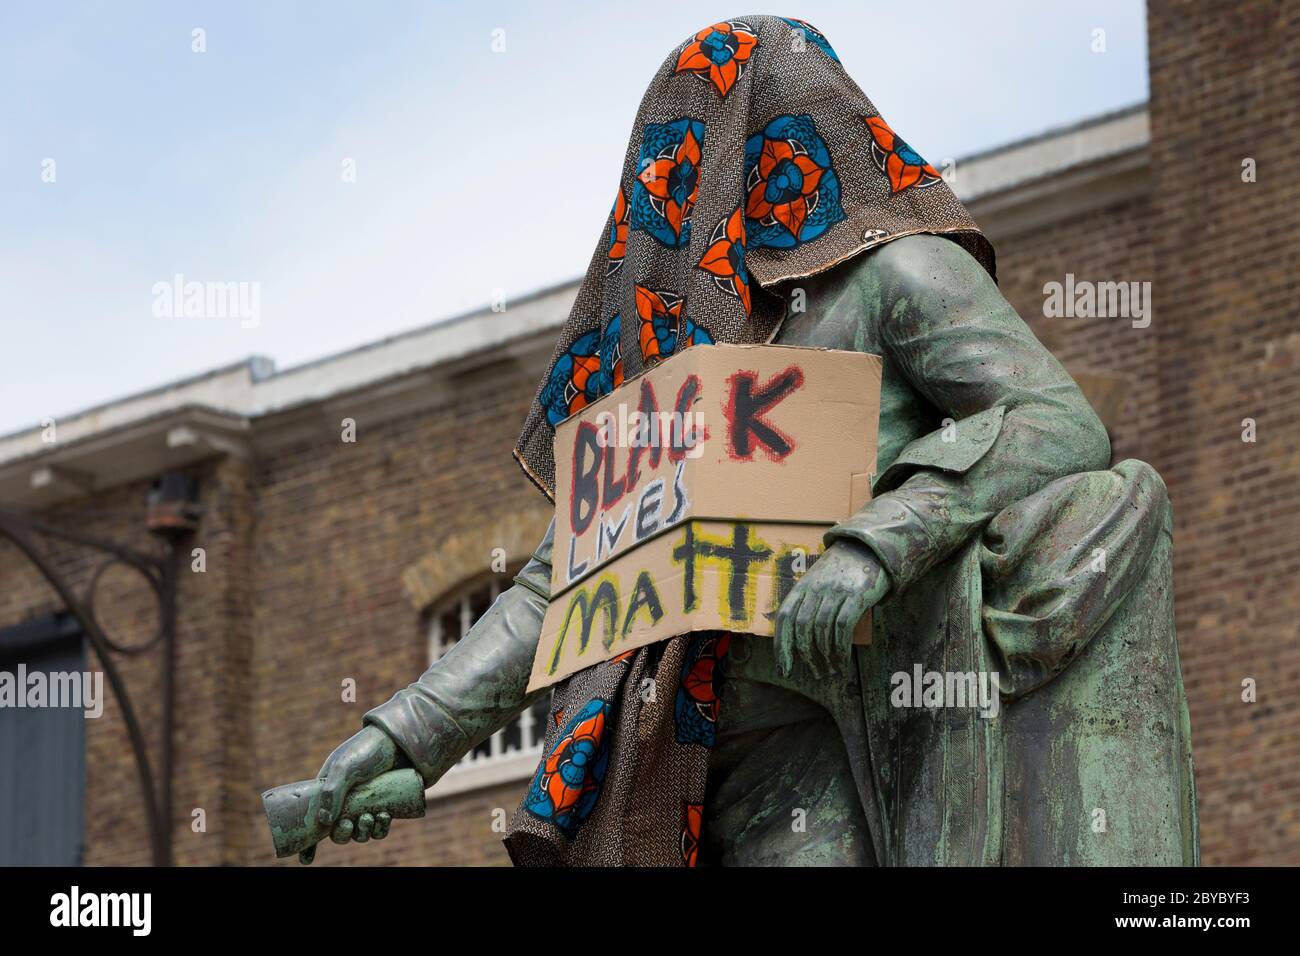 Hours before it was removed by the Canal and River Trust charity, the statue of slave merchant, Robert Milligan stands covered by Black Lives Matter activists outside the Museum of London's Docklands Museum on West India Quay, once the world's longest warehouse paid for by slavery profits, 9th June 2020, in London, England. In the aftermath of the George Floyd protests in the US and UK Black Lives Matter groups, who are calling for the removal of statues and street names with links to the slave trade, Milligan's and other statues of British slavery profiteers, have become a focus of protest. Stock Photo